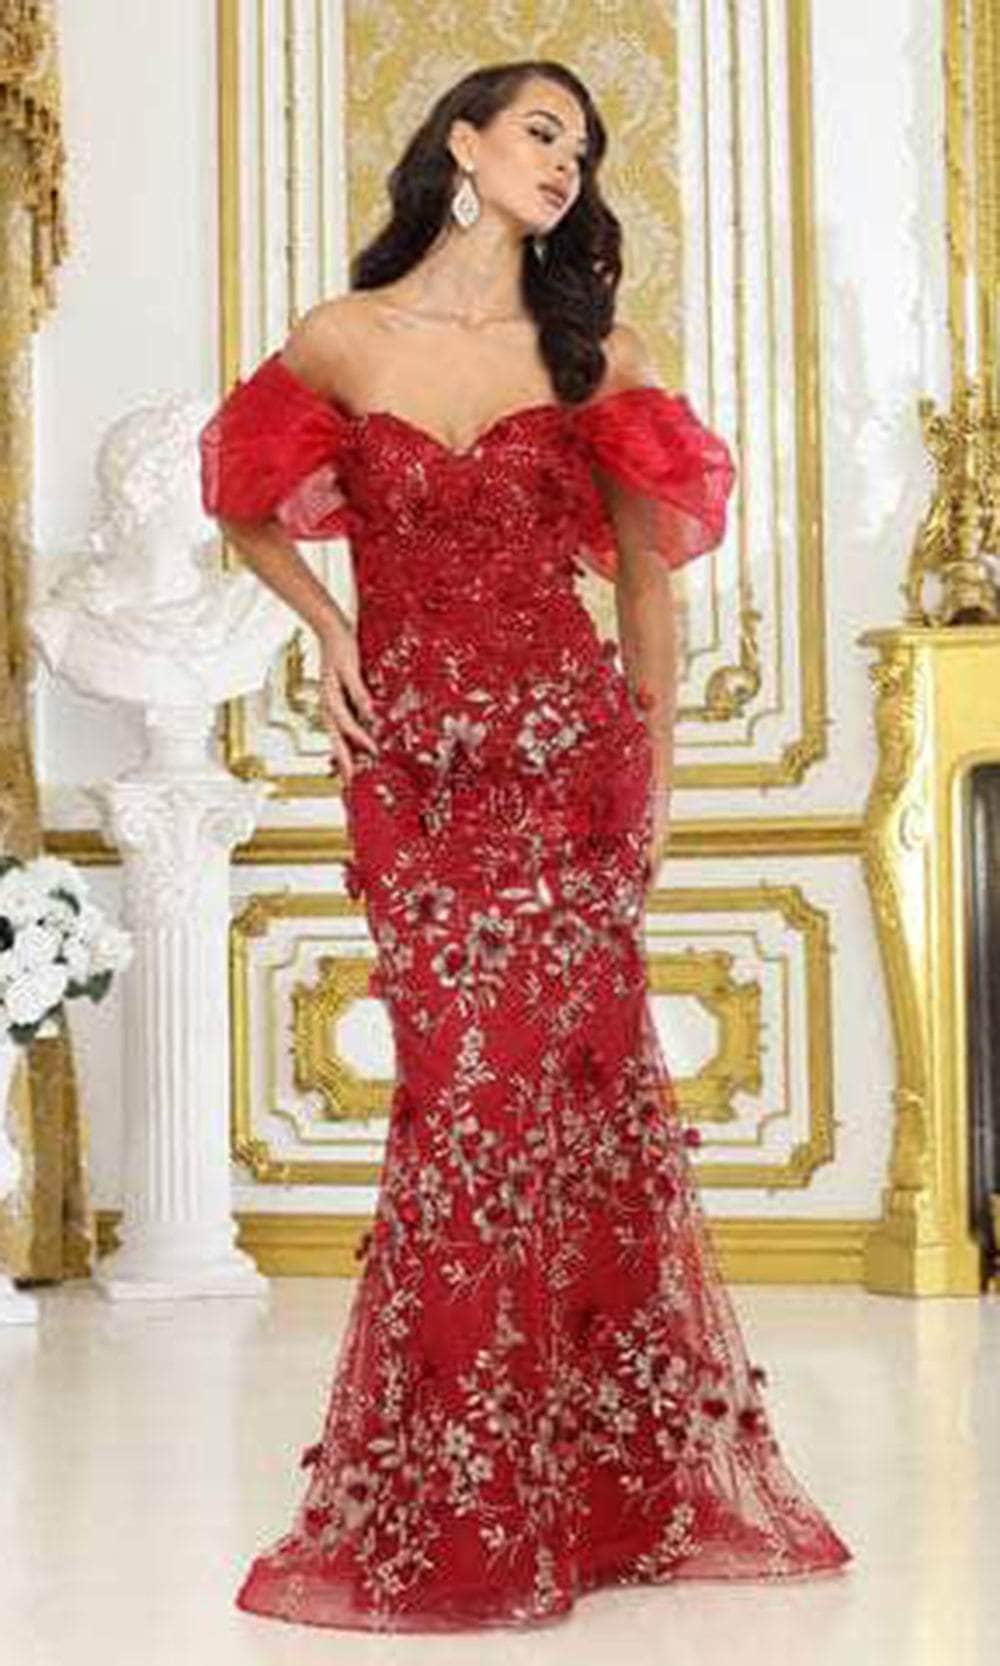 Image of May Queen RQ8037 - Floral Applique Prom Gown